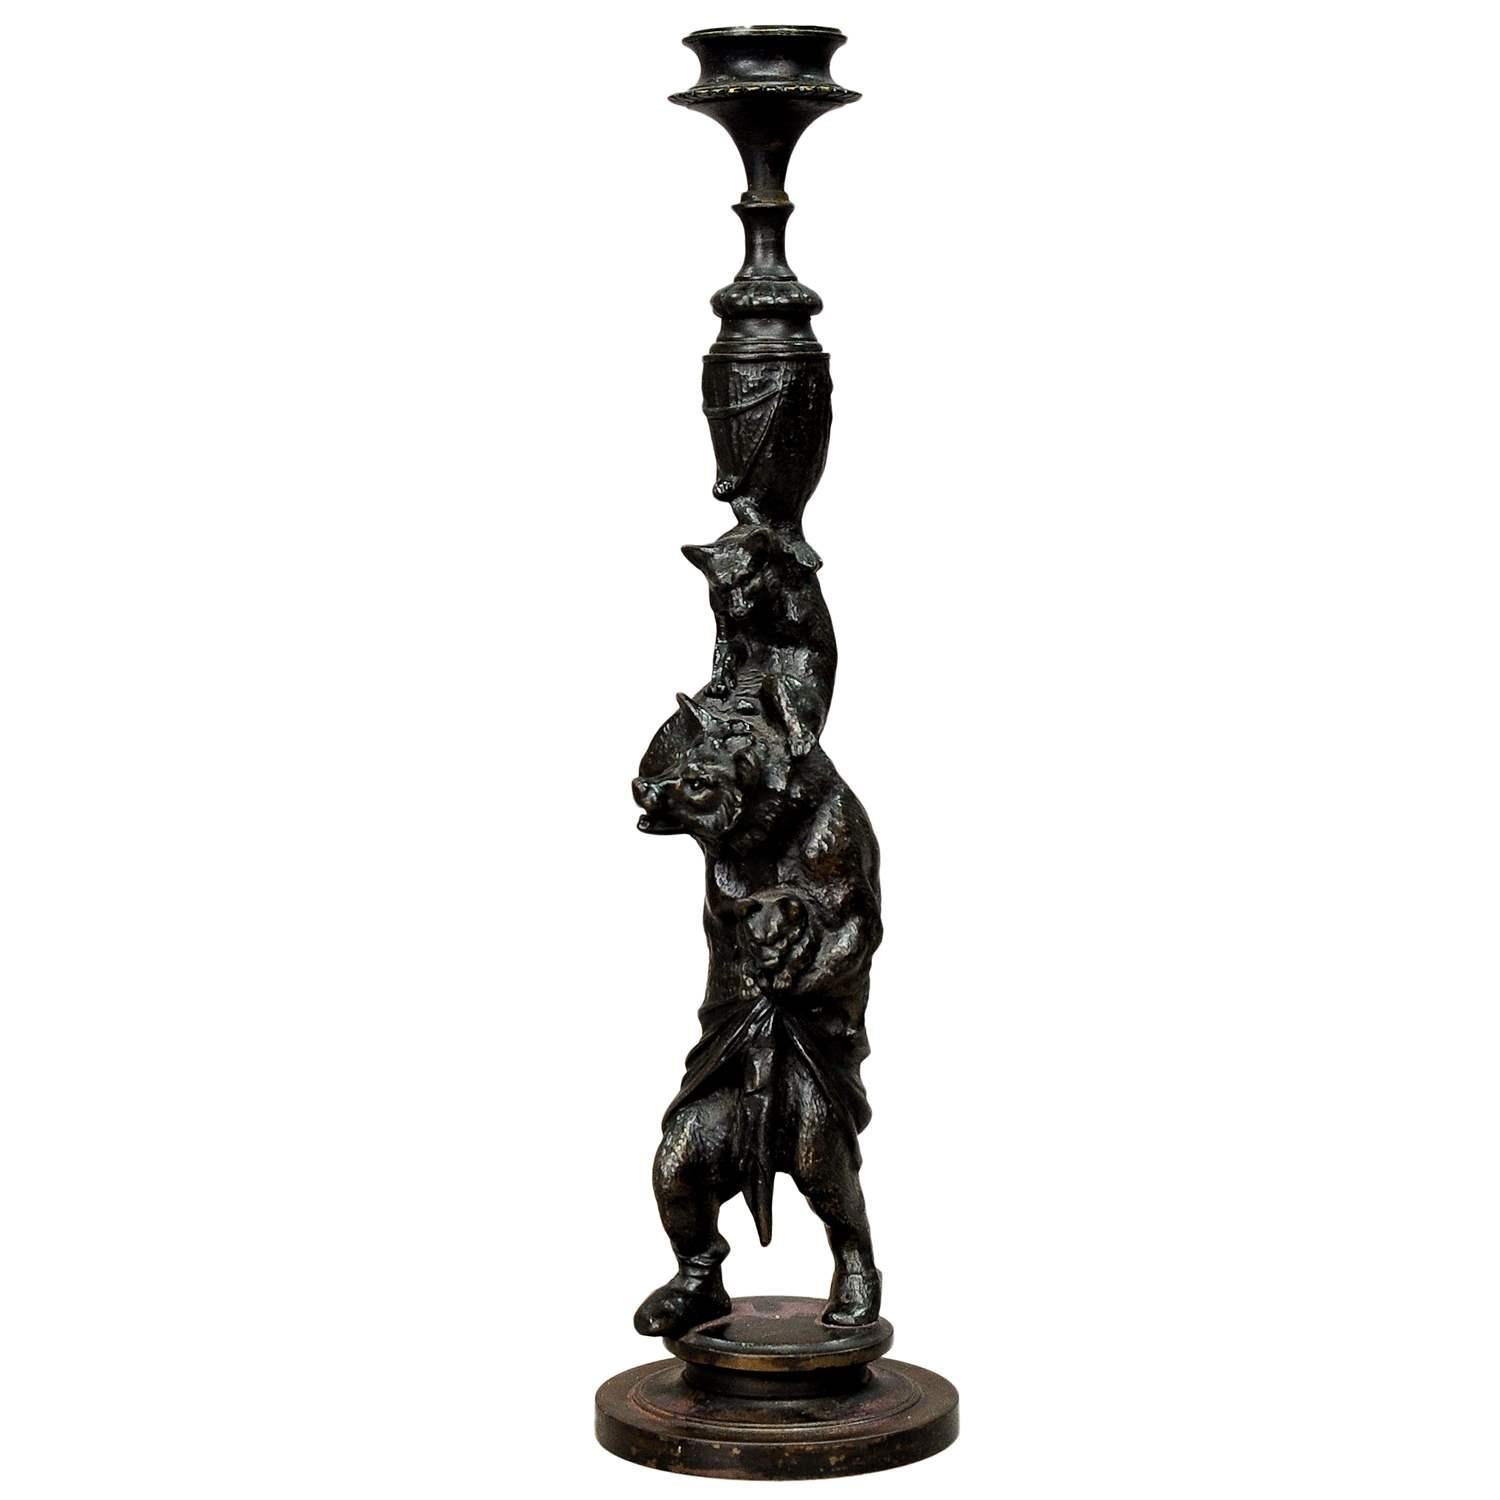 Victorian Casted Iron Candle Stick with Bears

A great Victorian casted iron candle stick, Germany circa 1860. It is depicting a mother bear holding one cub in her left paw and another one on her back. The art craft is signed with foundry mark F. L.